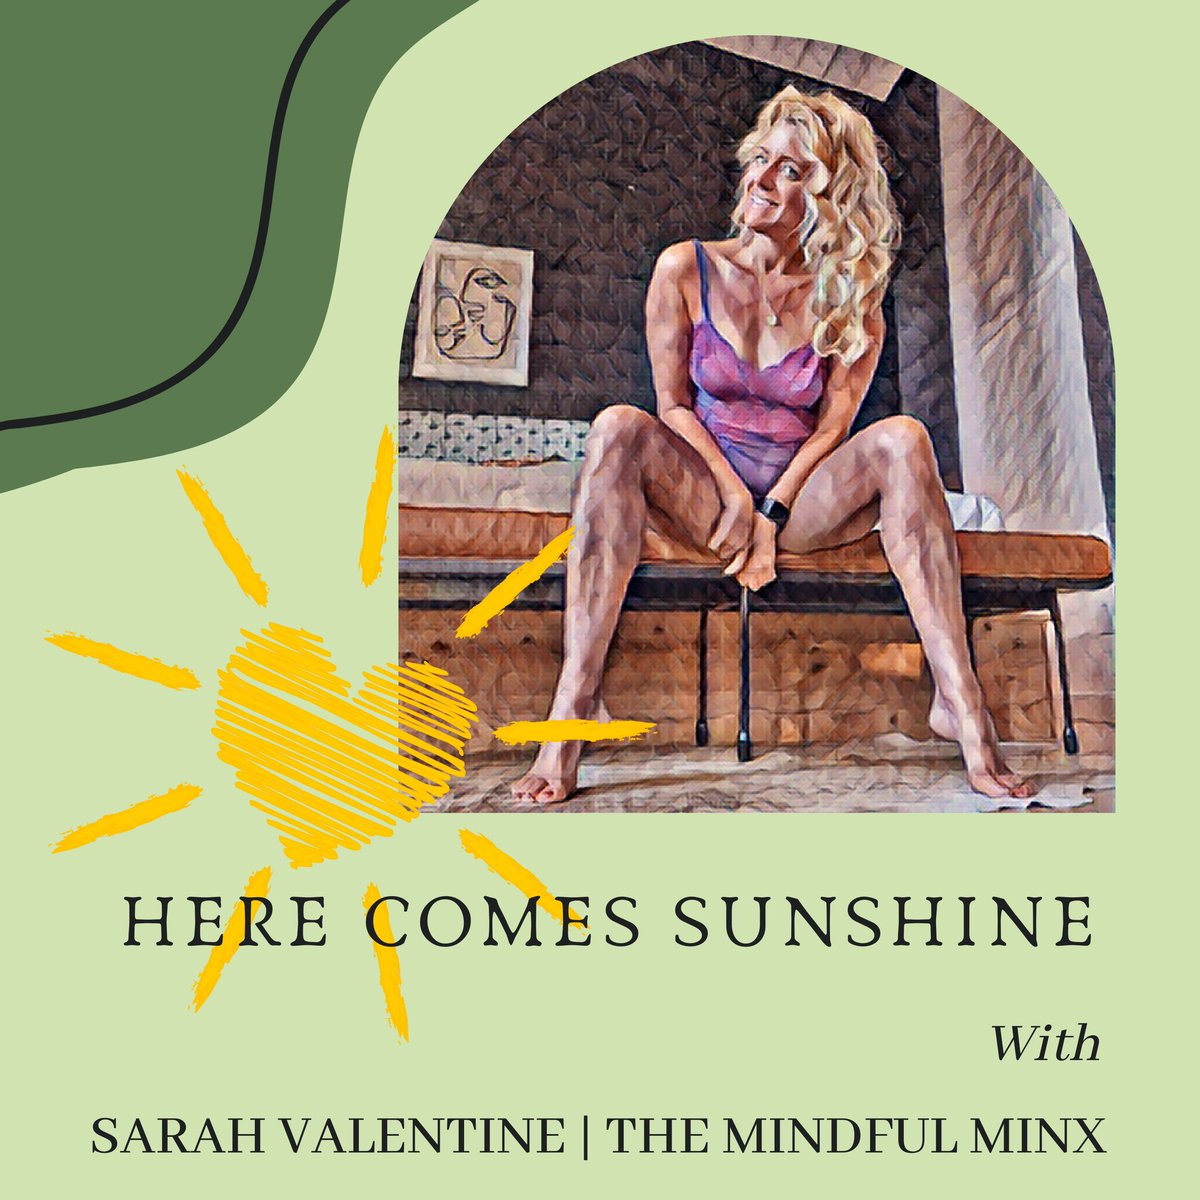 Listen to the most recent episode of my podcast: Episode 84: Guided Meditation led by Sarah: Mountain Meditation anchor.fm/themindfulminx…